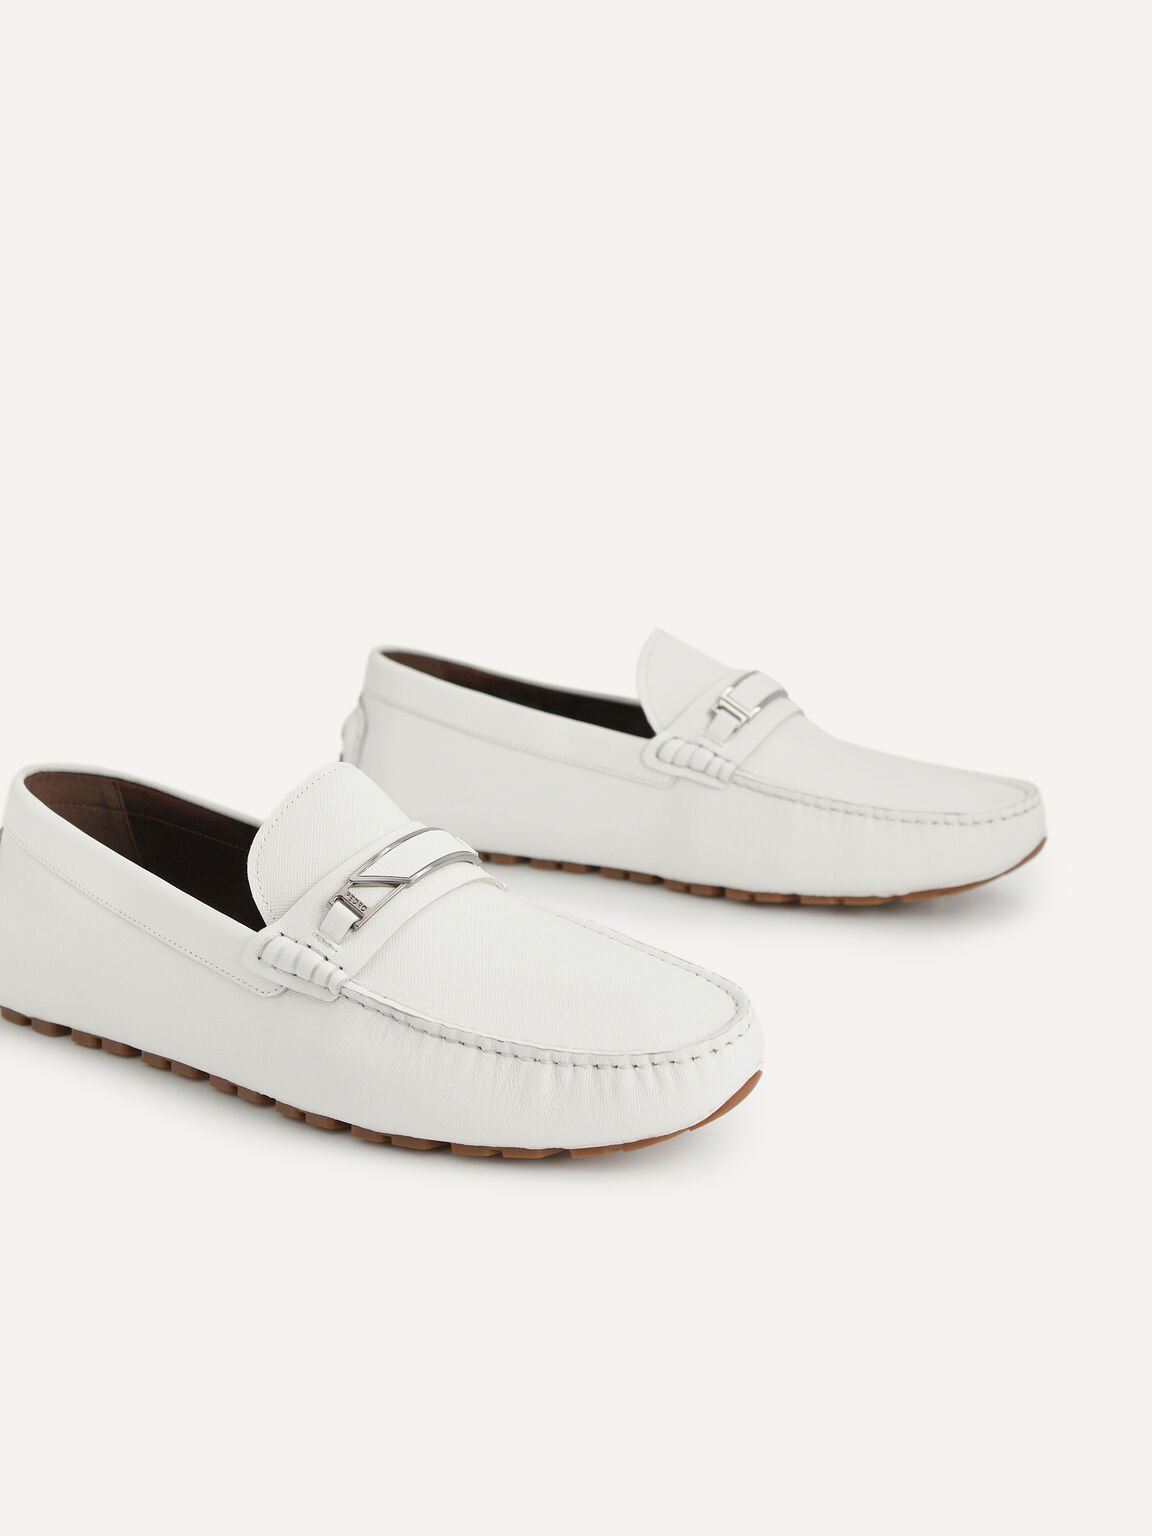 Leather Moccasins with Metal Bit, White